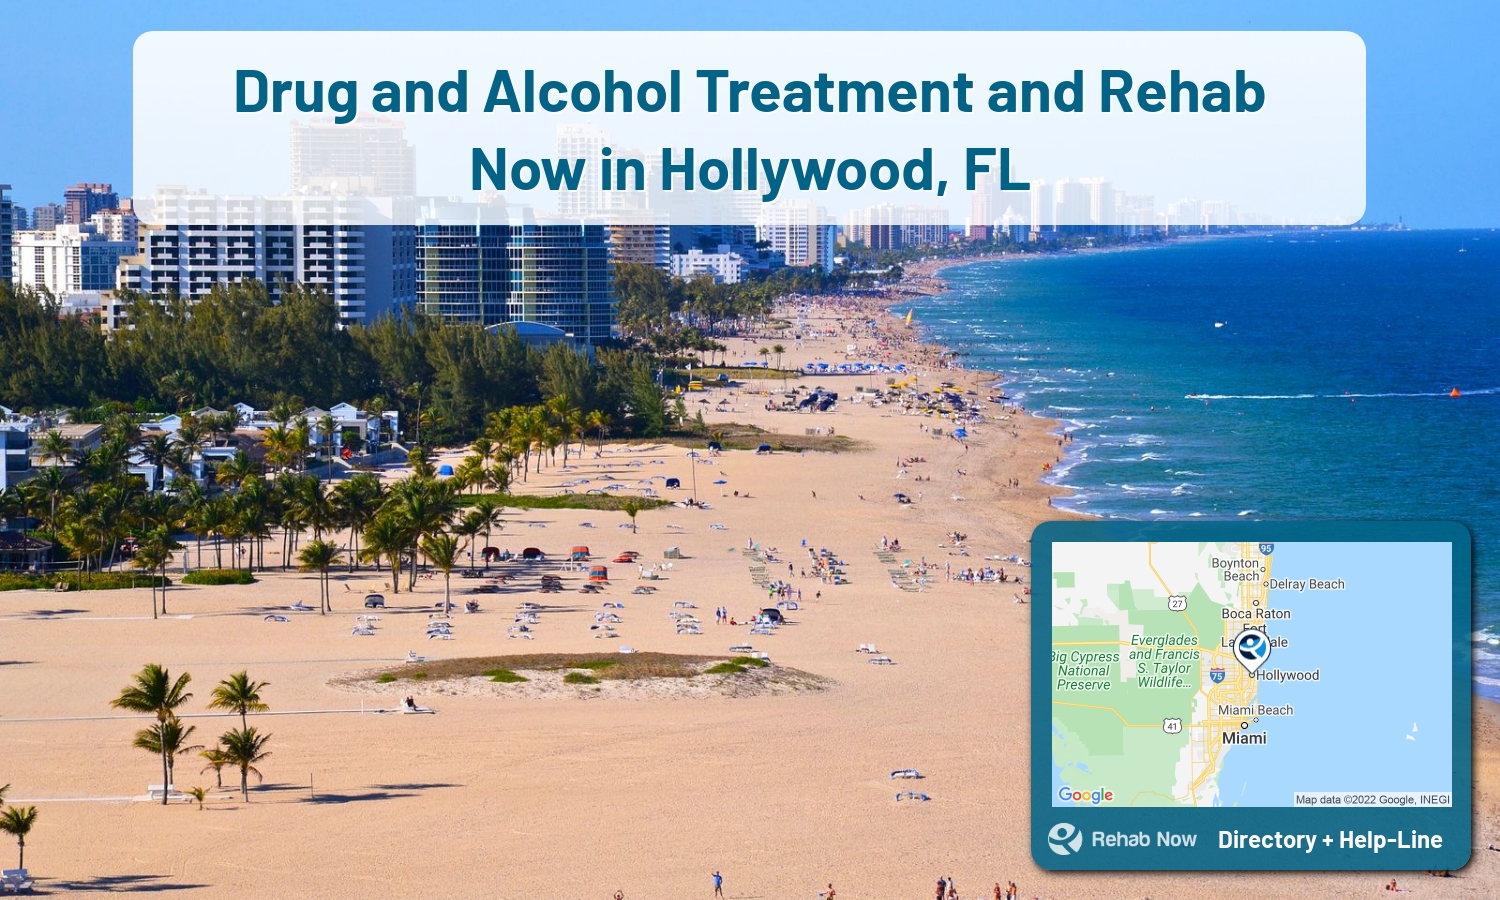 View options, availability, treatment methods, and more, for drug rehab and alcohol treatment in Hollywood, Florida